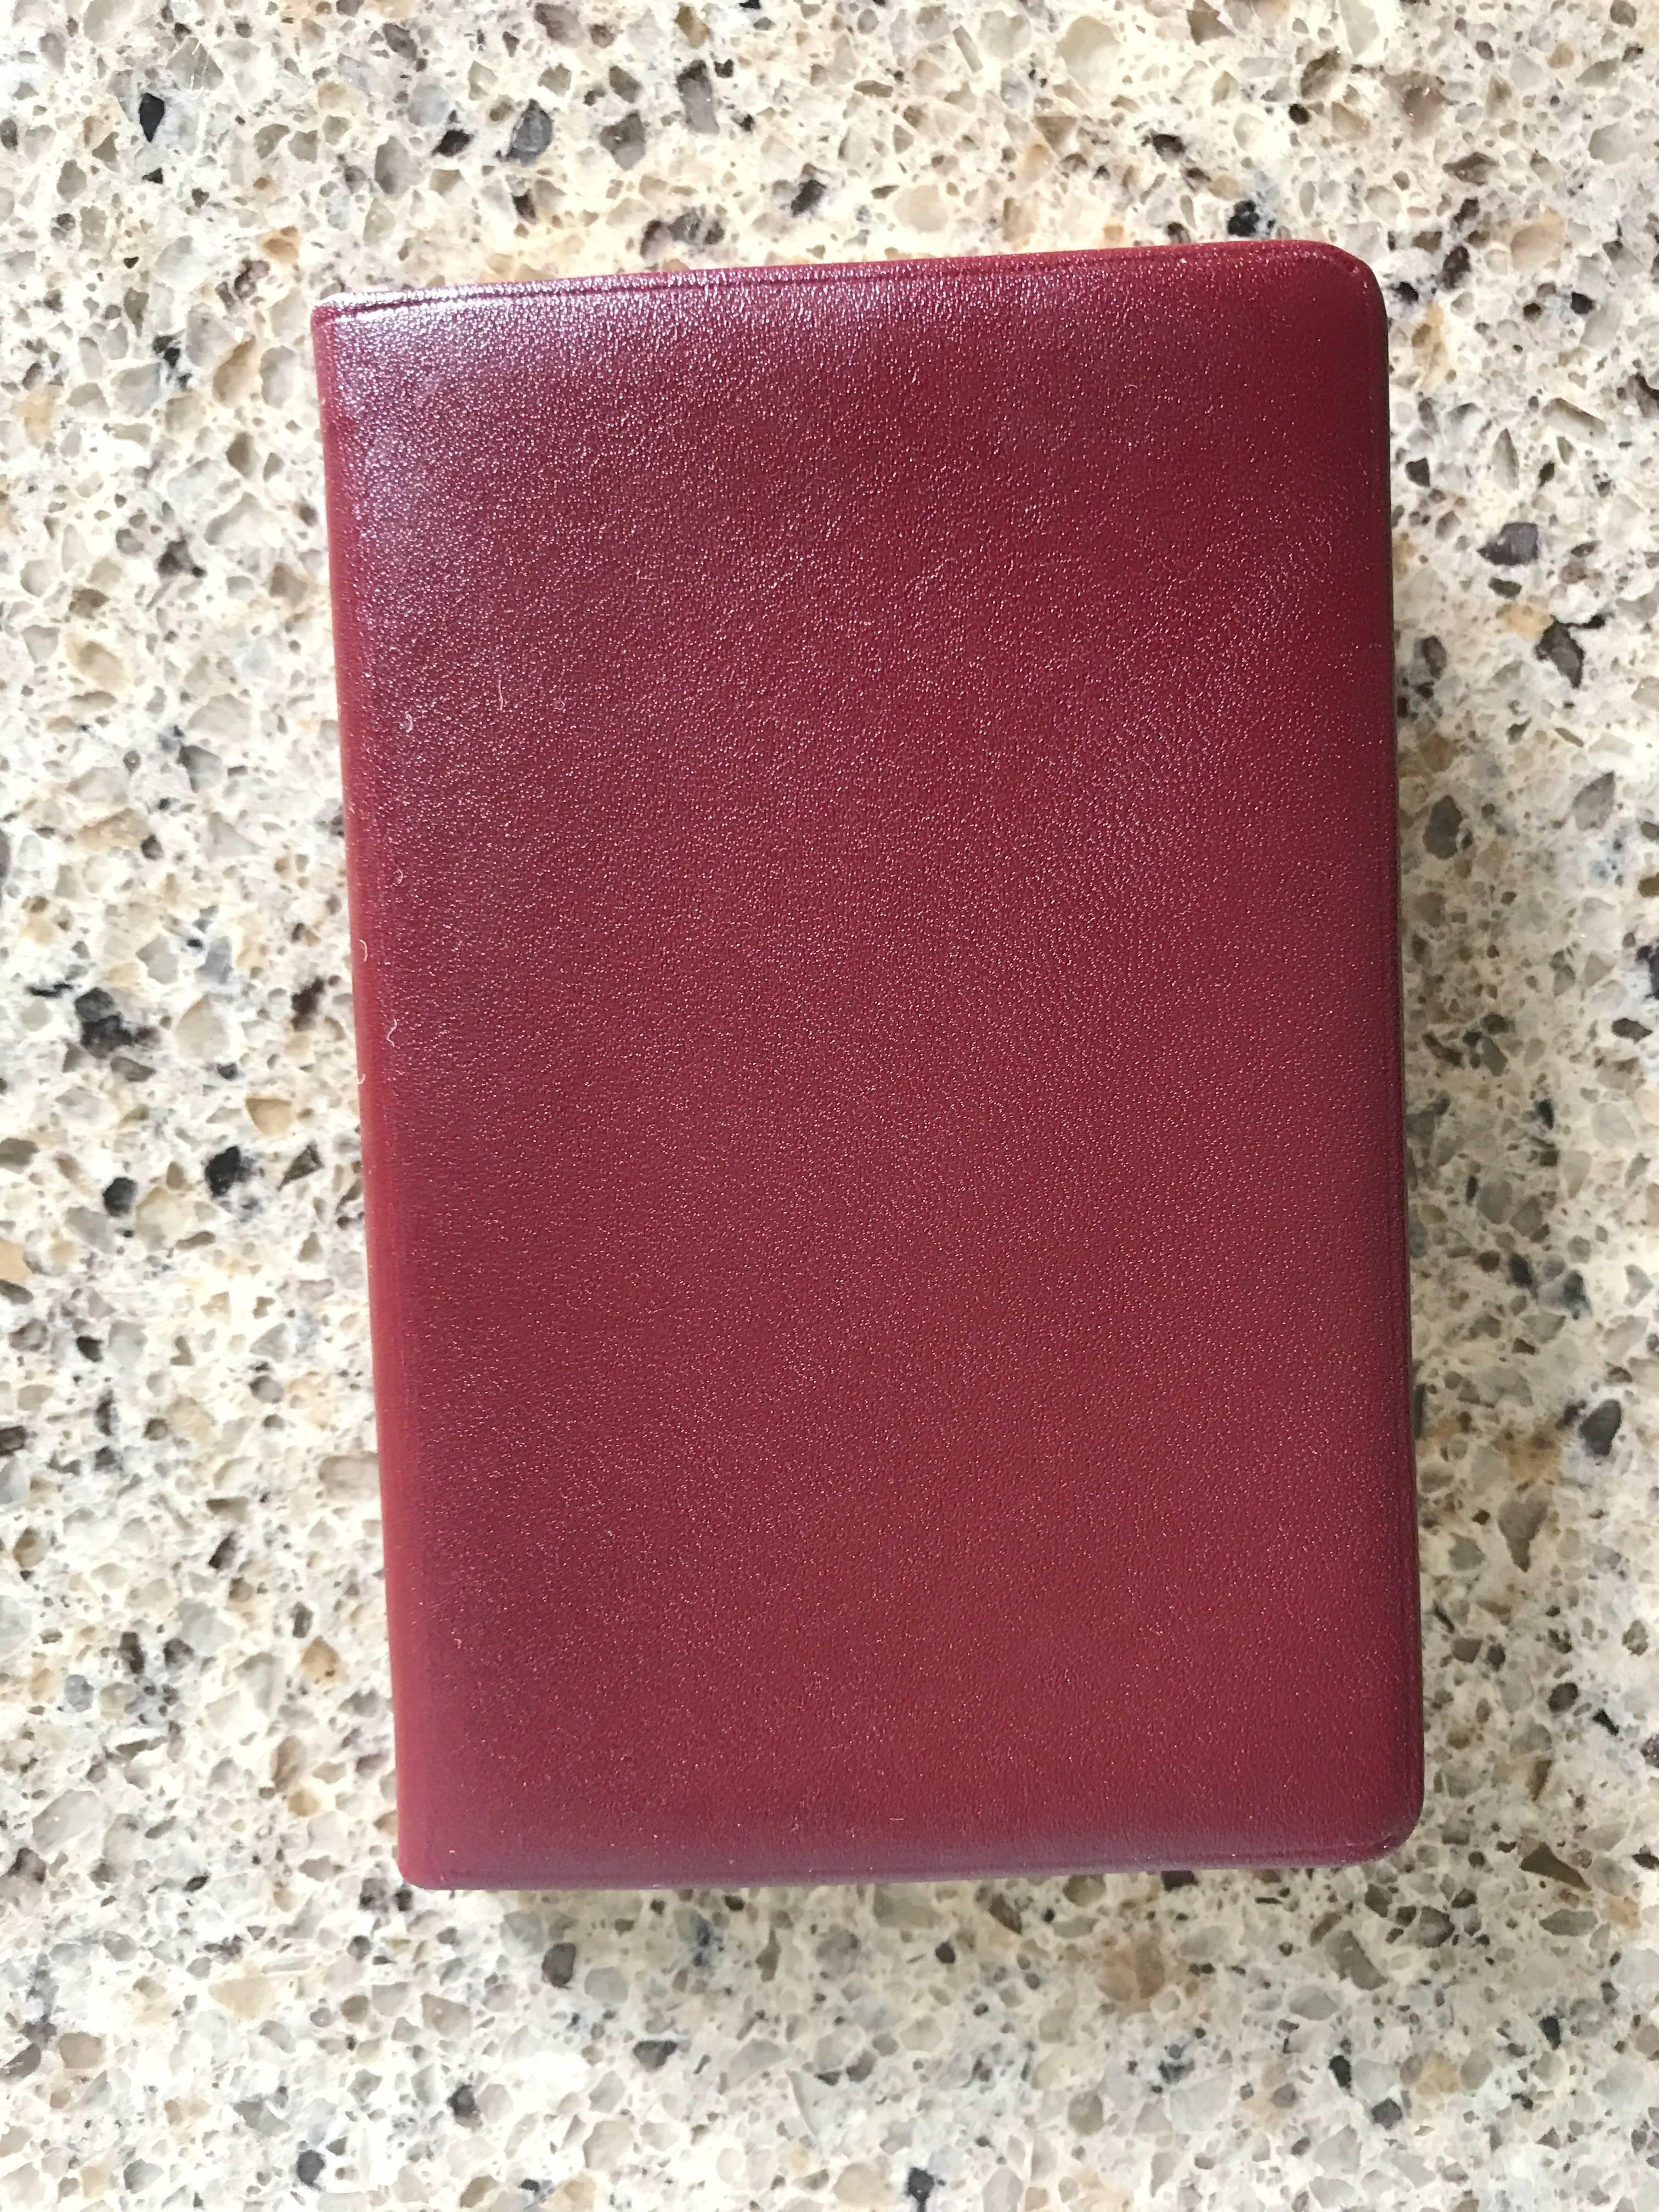 Women's or Men's Cartier Le Must de New in Box Burgundy Cordovan Leather Pocket Size Address Book